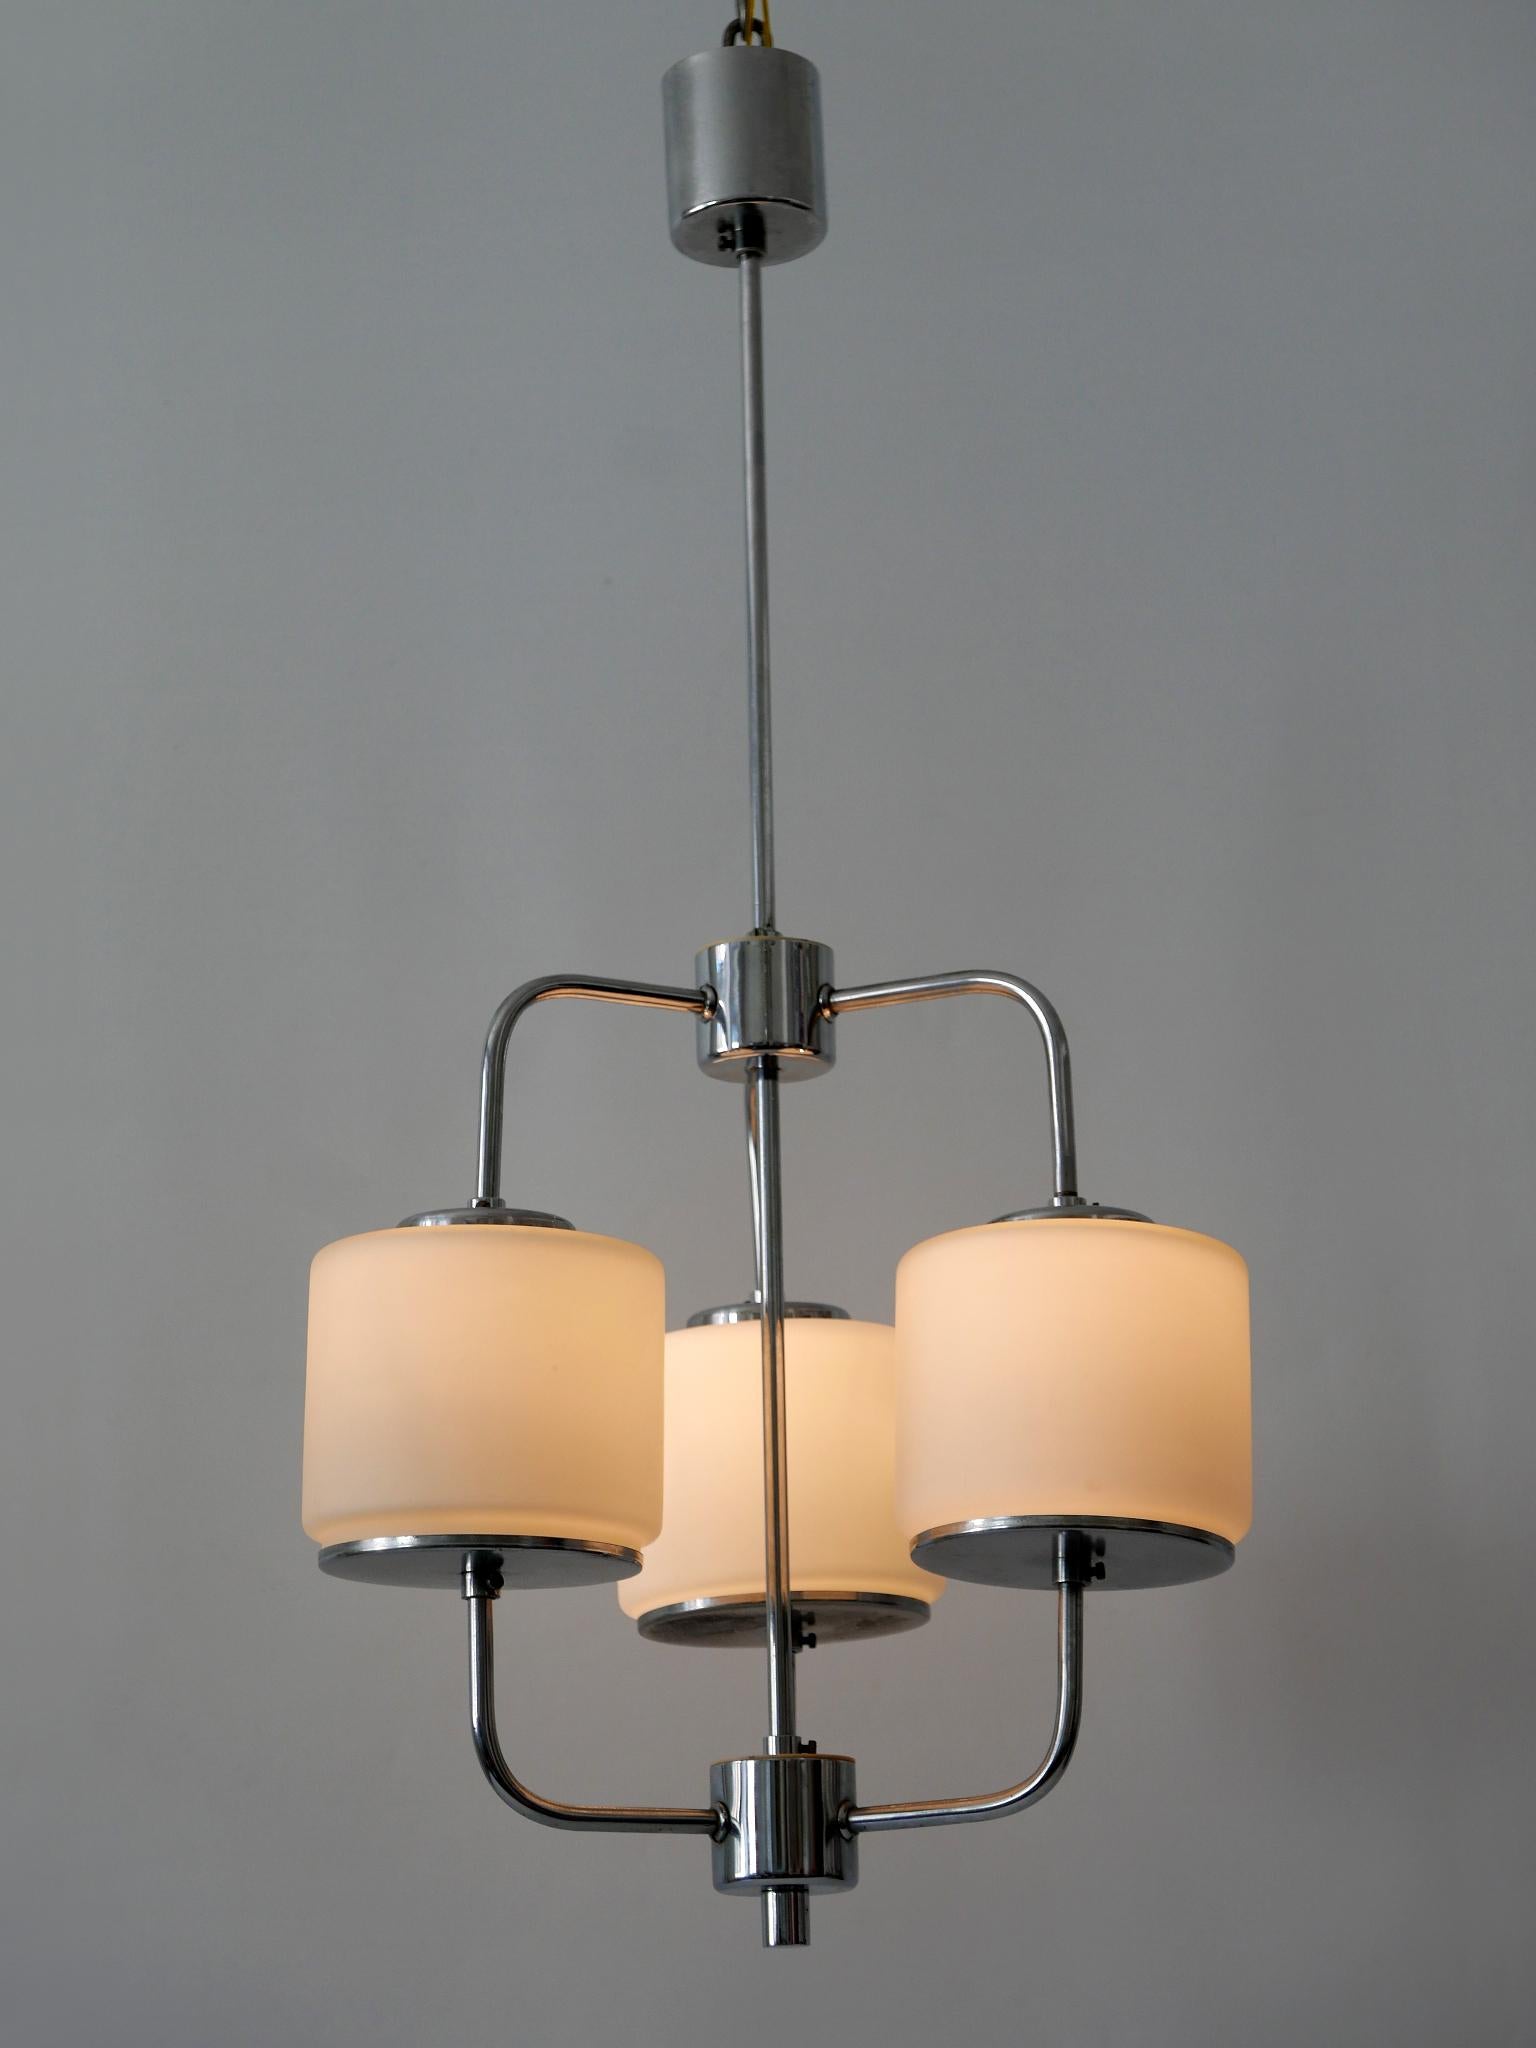 Rare & Elegant Art Deco or Bauhaus Chandelier or Pendant Lamp Germany 1930s In Good Condition For Sale In Munich, DE